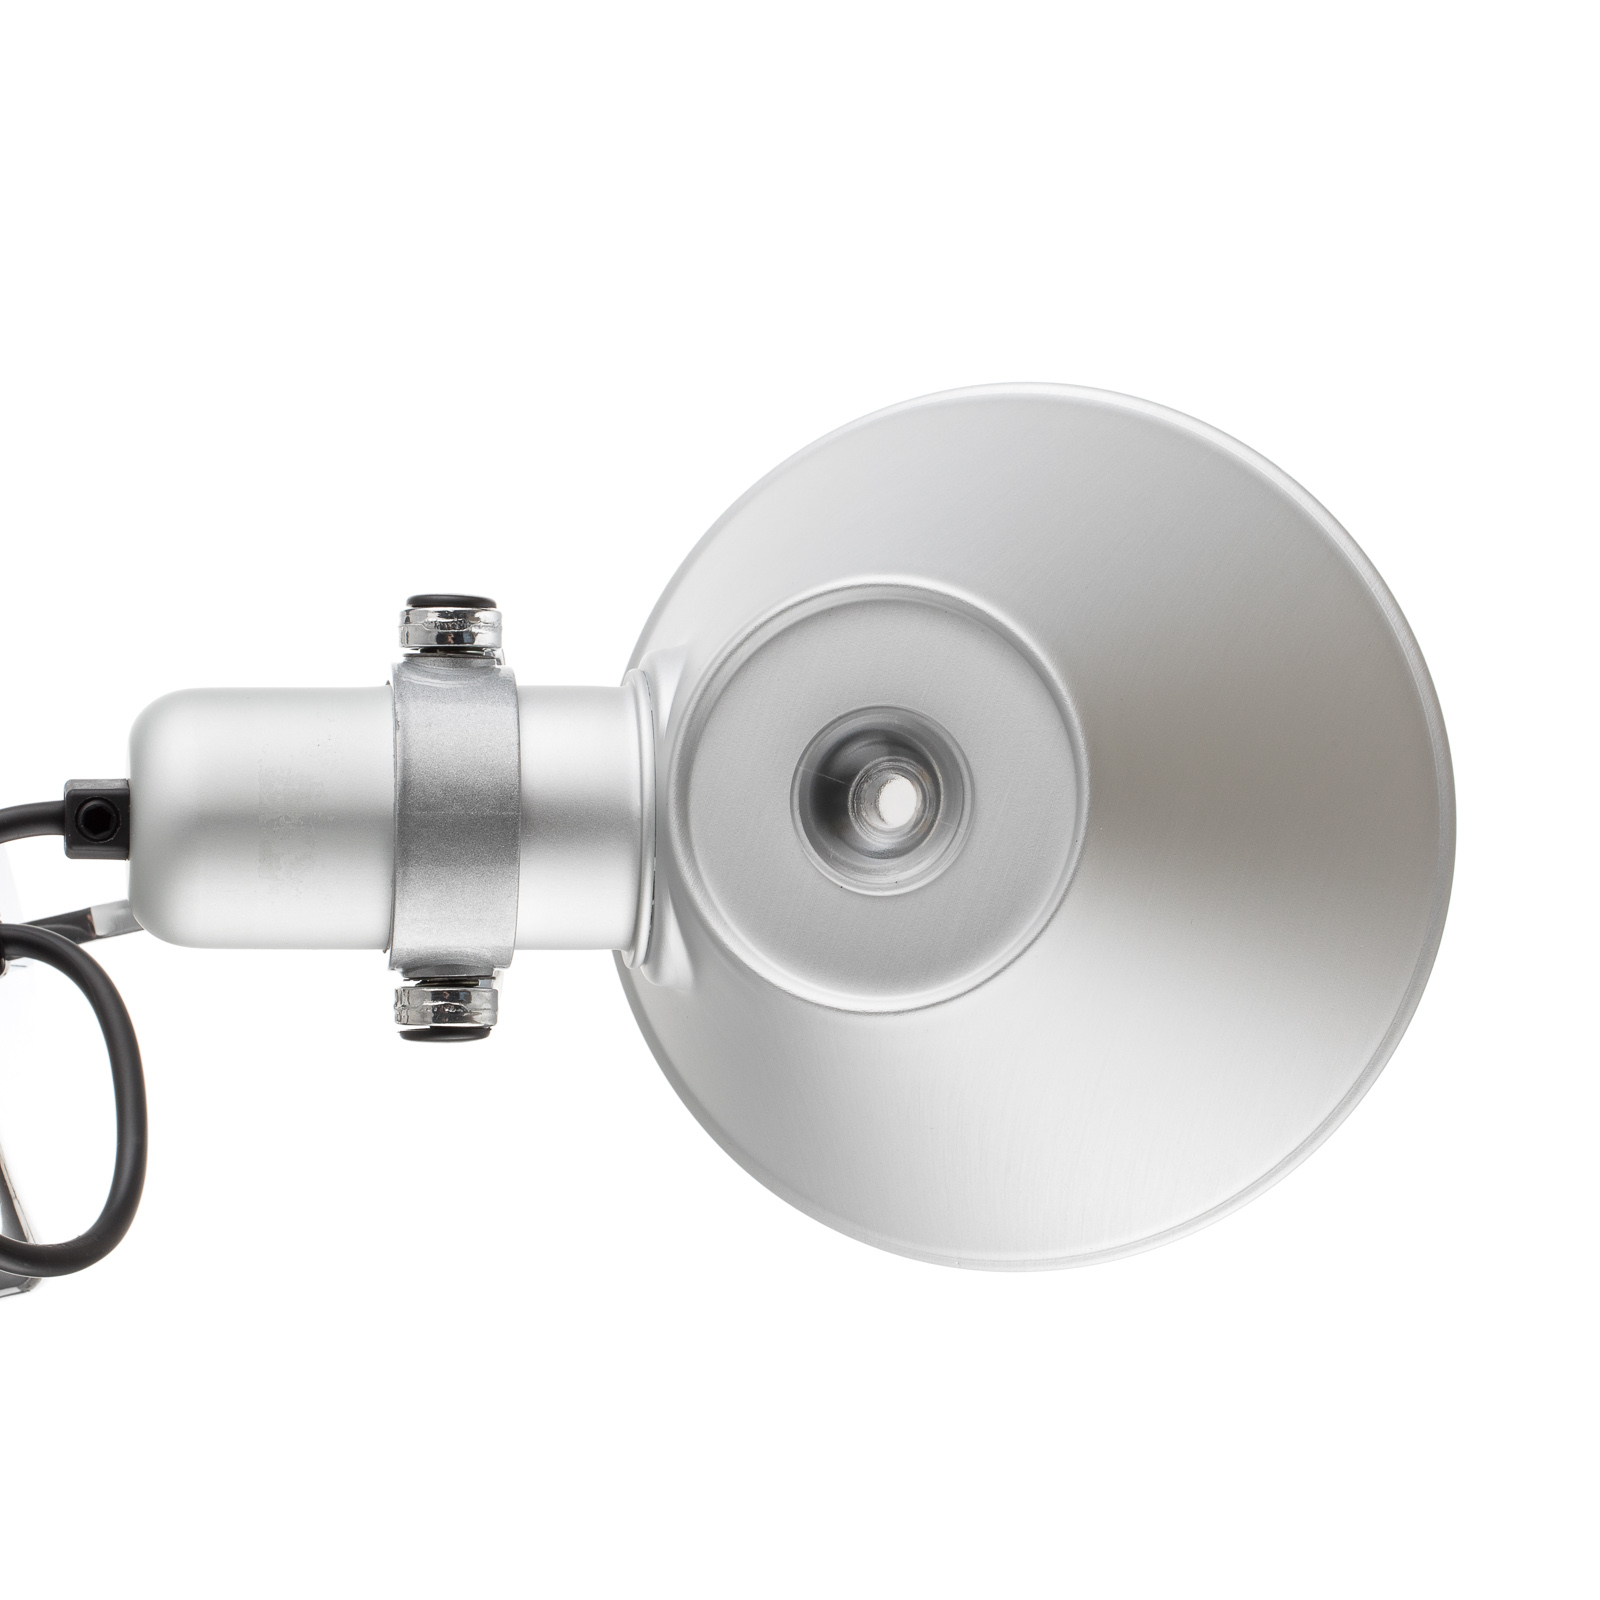 Artemide Tolomeo Faretto without switch, 2,700 K